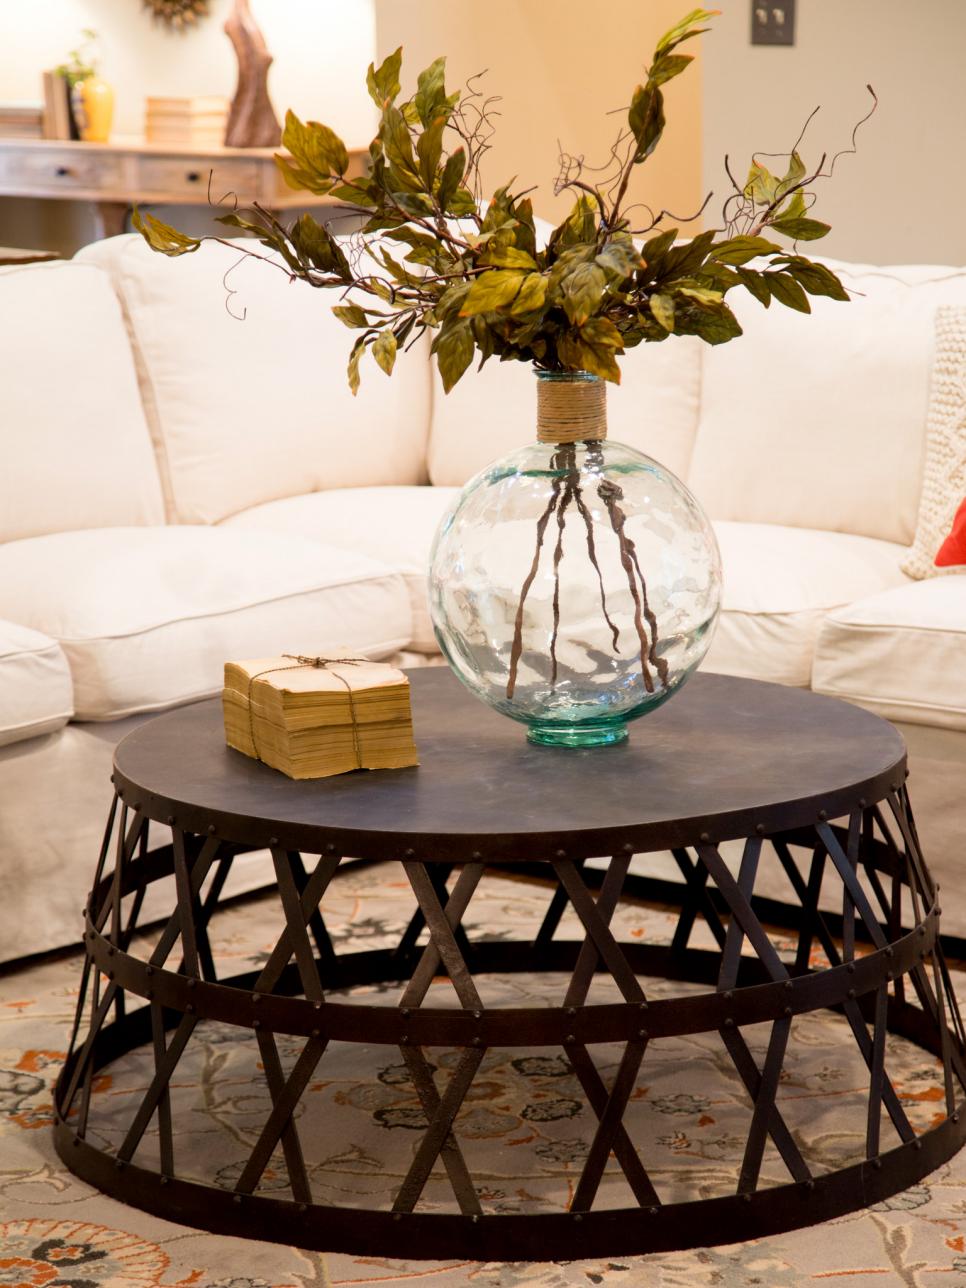 Industrial Coffee Table and Glass Vase Create Focal Point in Spacious